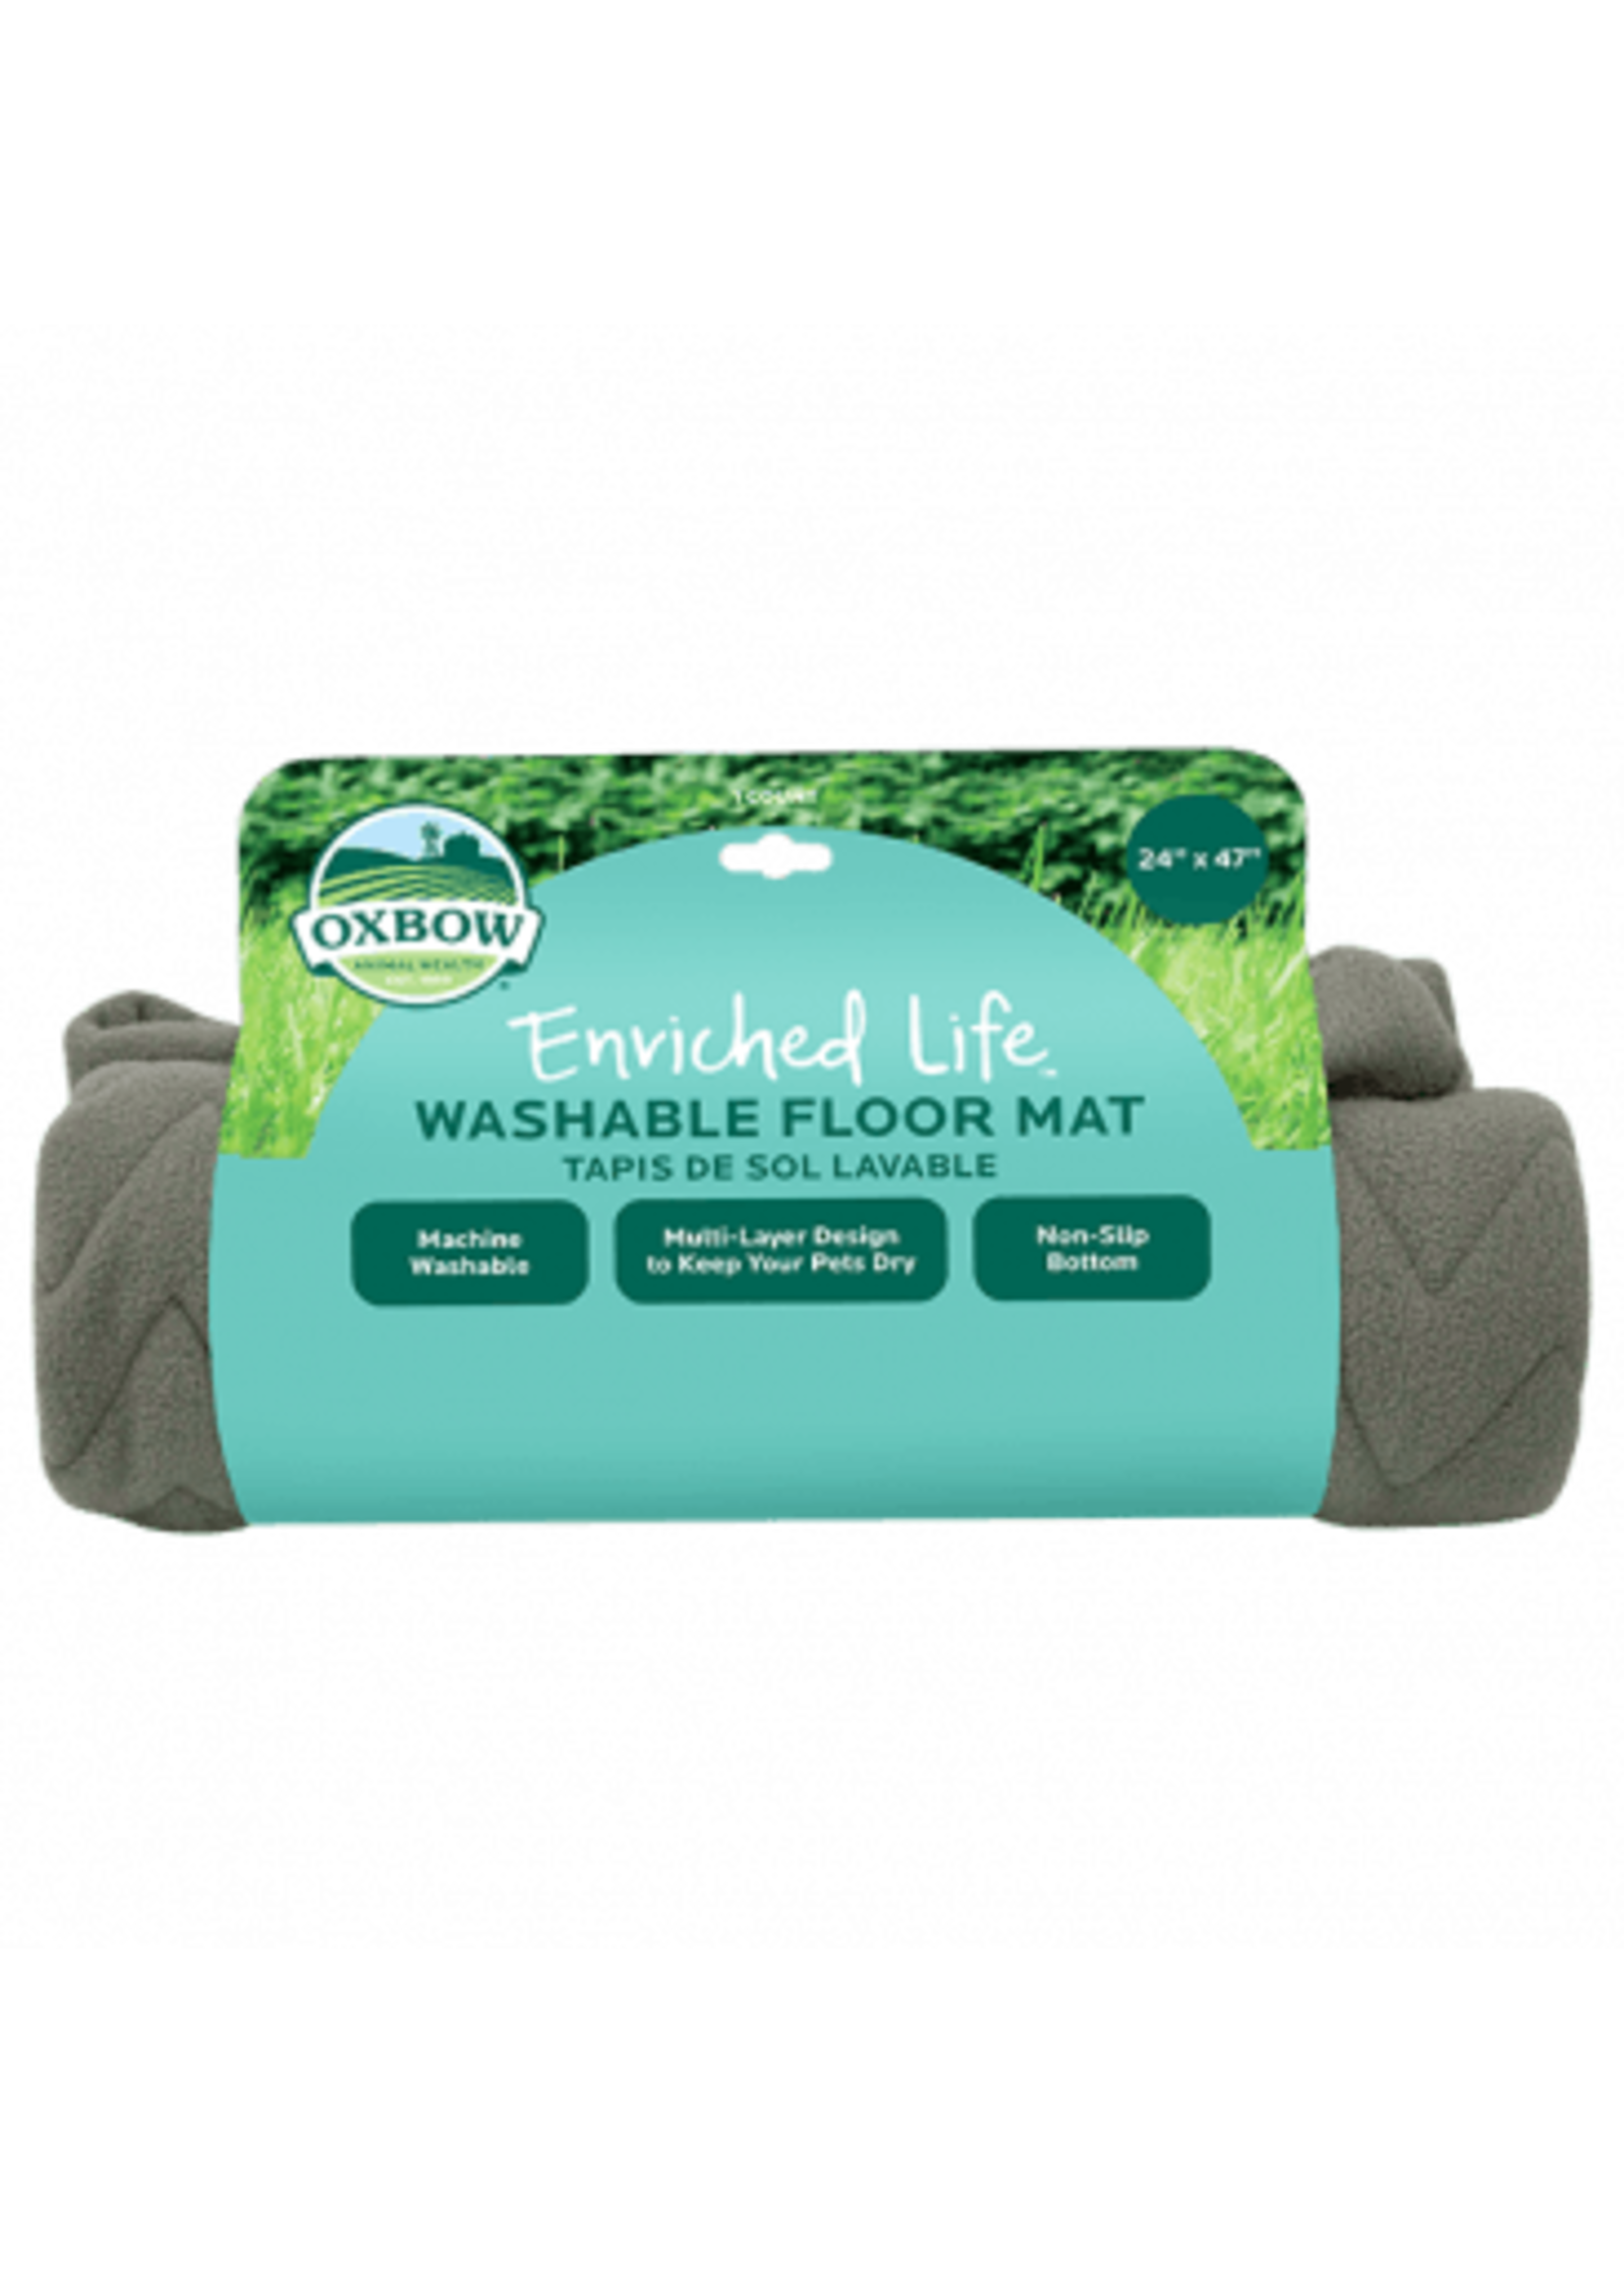 Oxbow Oxbow Enriched Life Washable Floor Mat